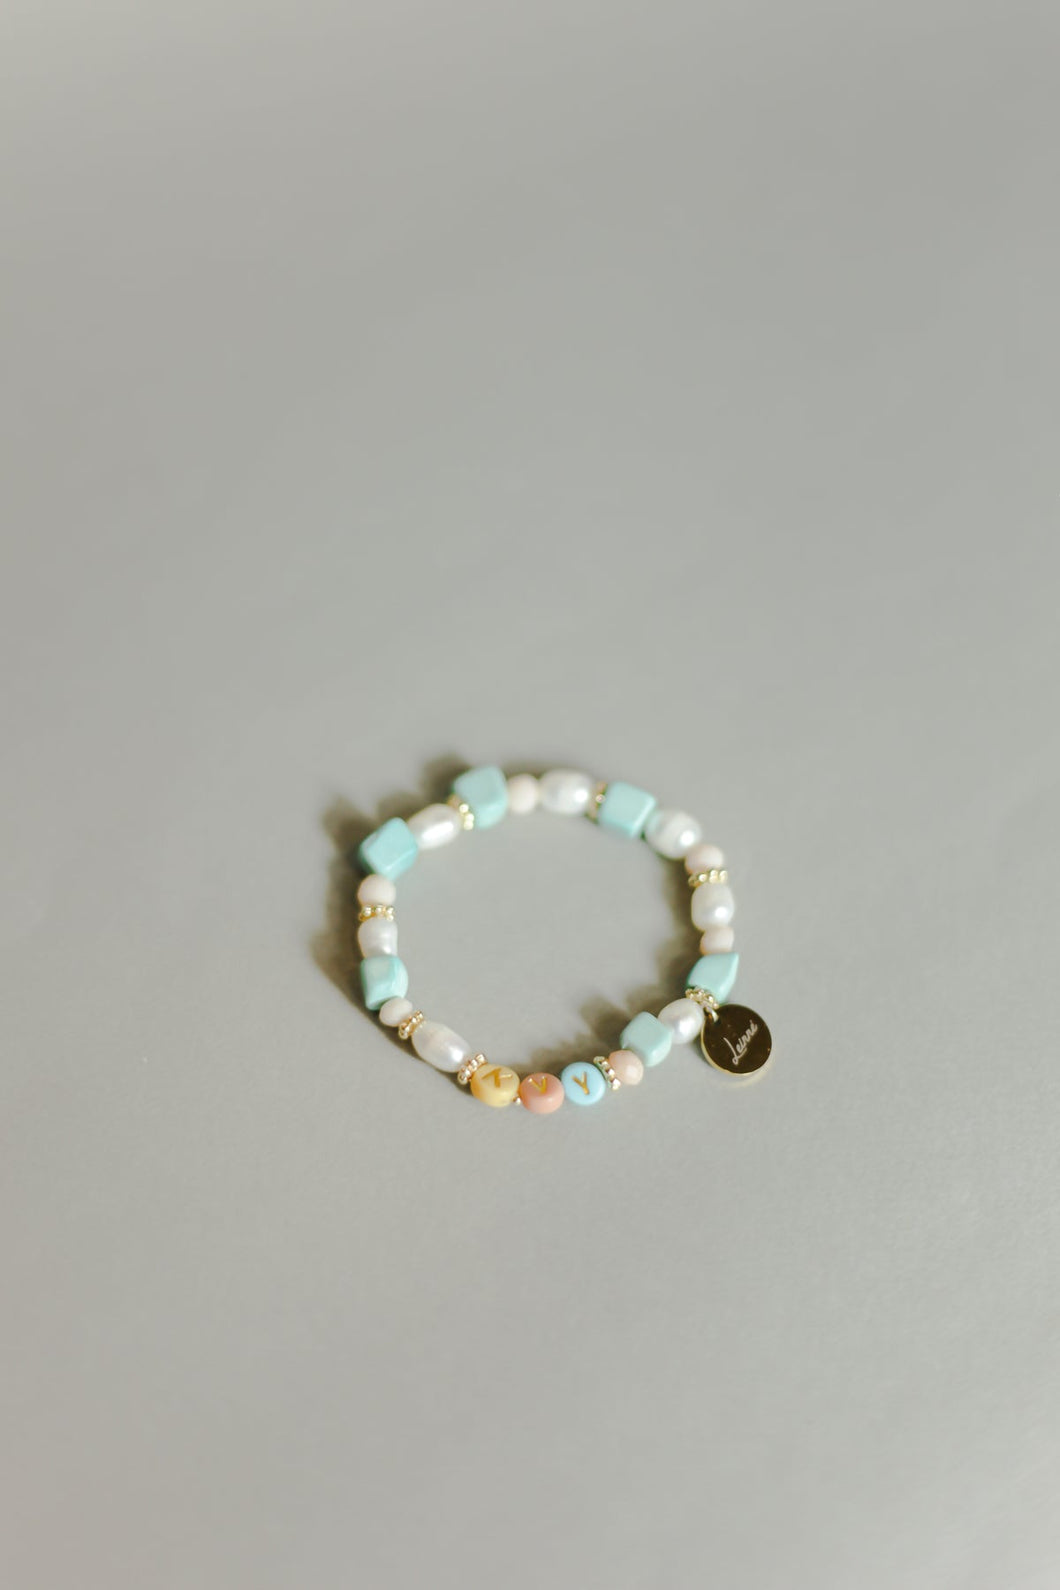 Turquoise pearl personalized bracelet
